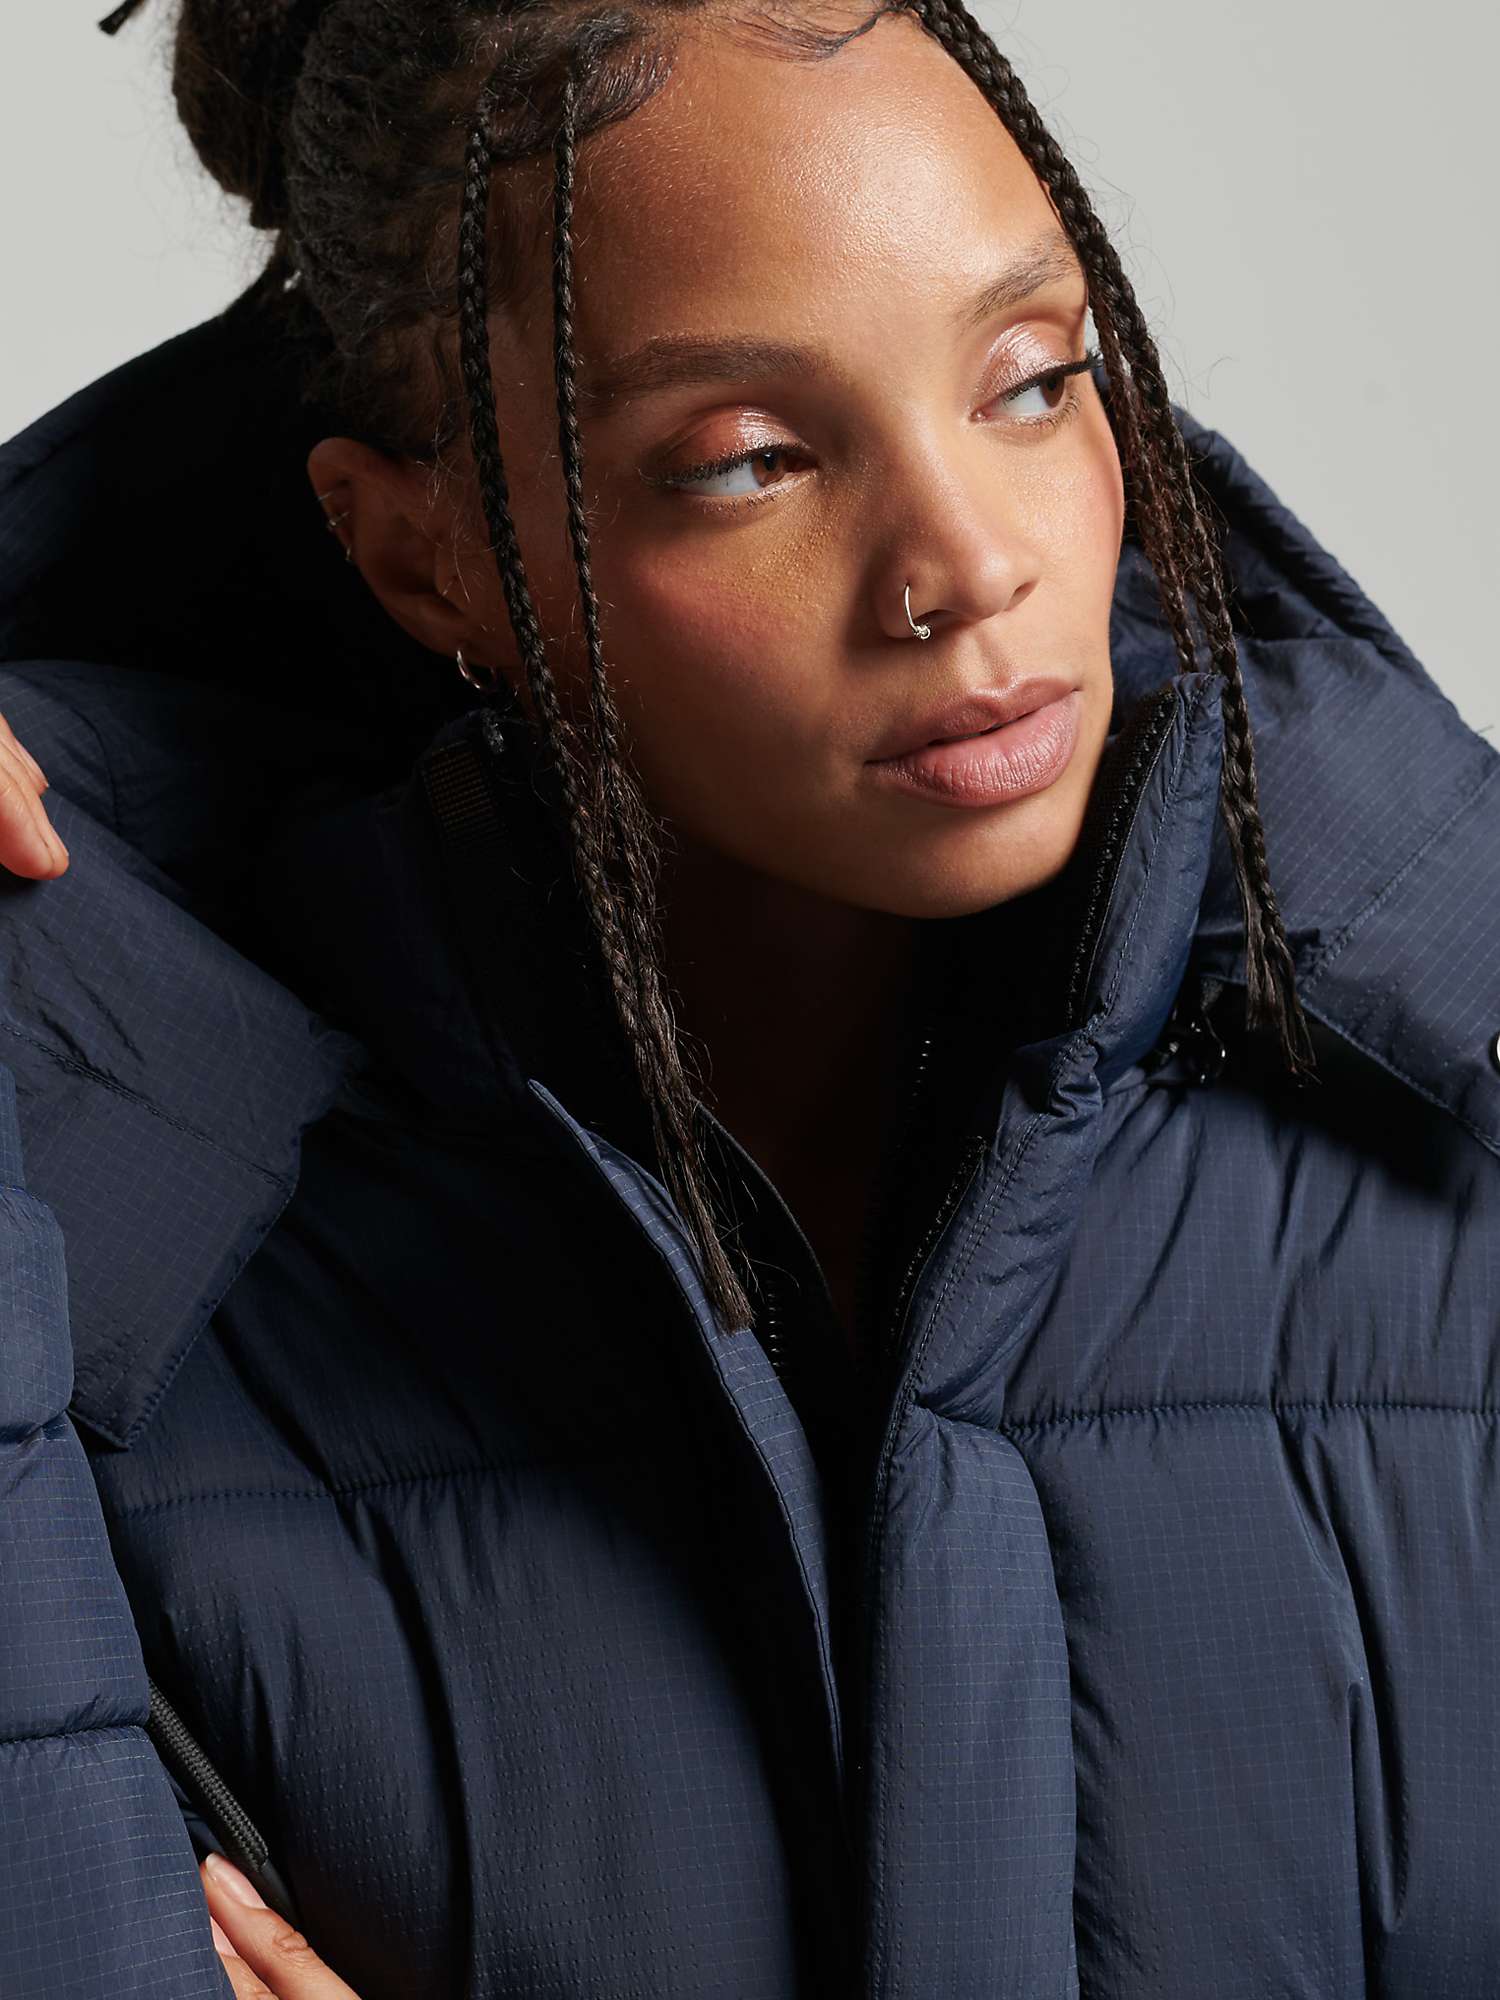 Superdry Hooded Ripstop Puffer Jacket, Eclipse Navy Grid at John Lewis ...